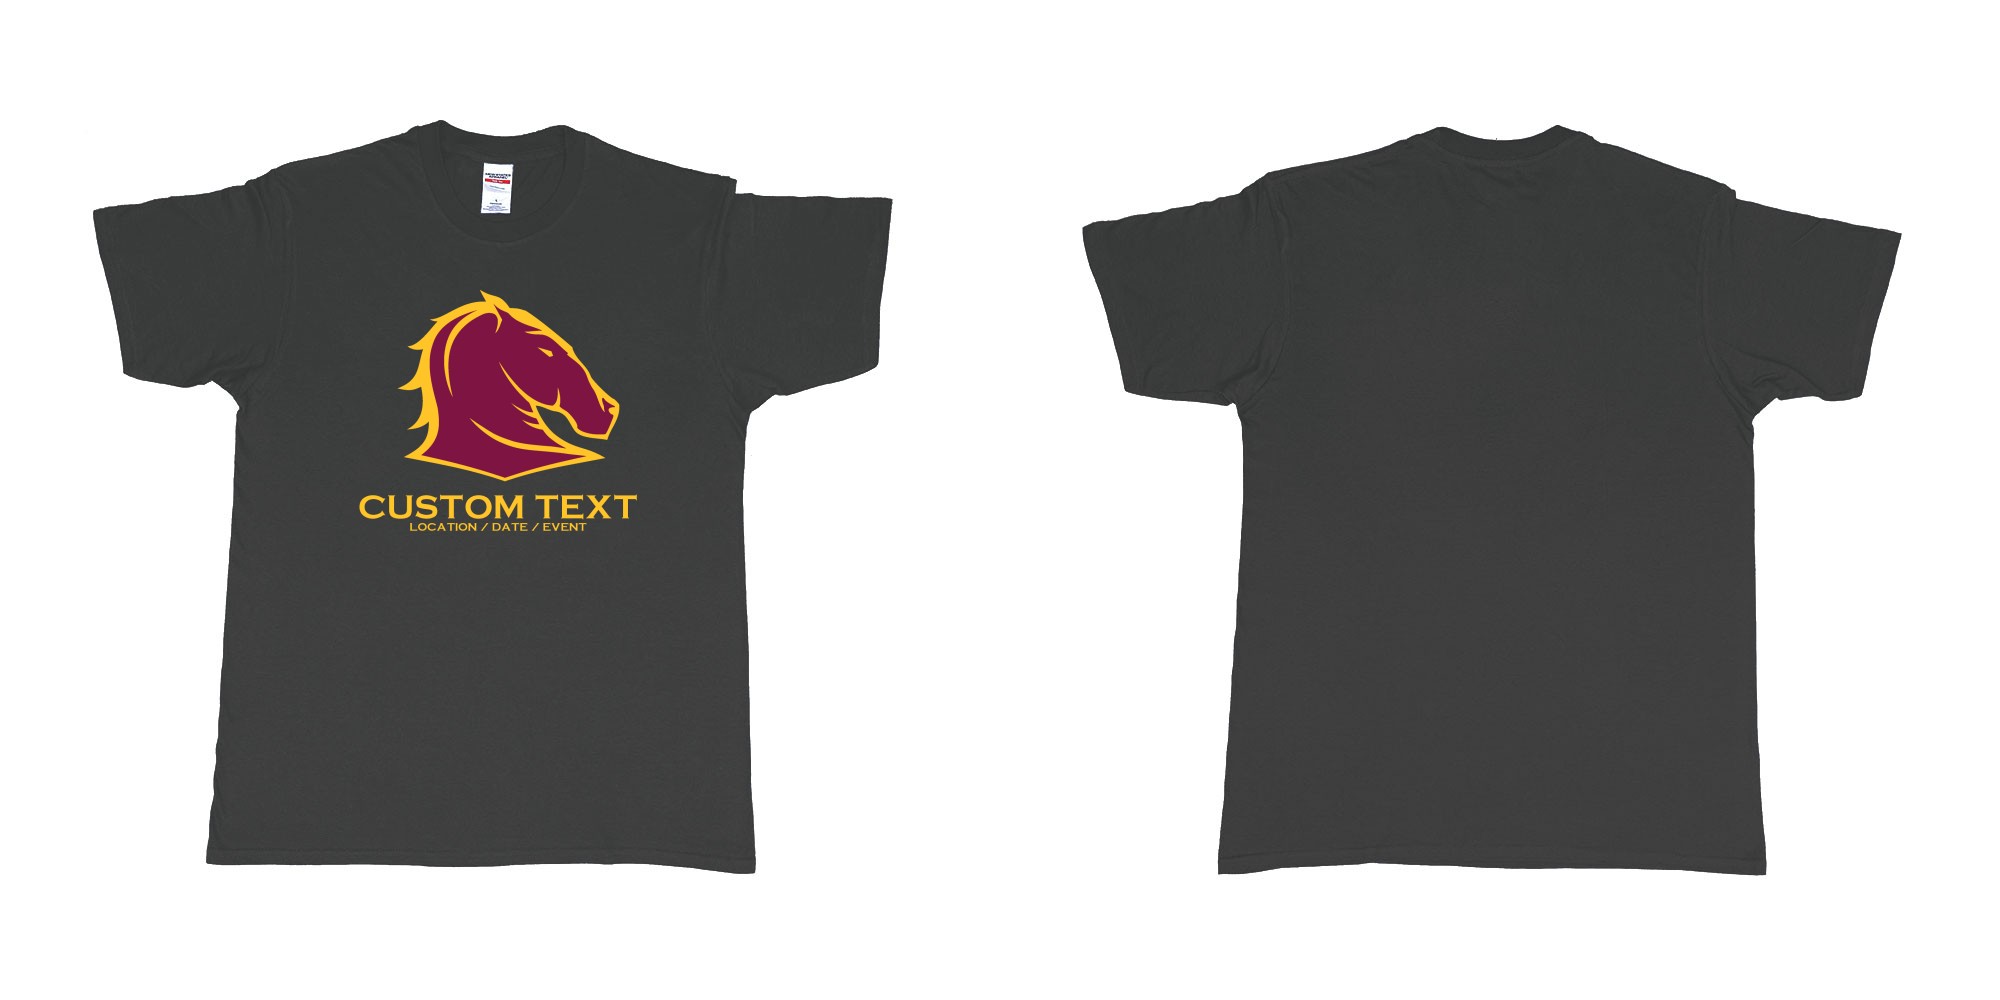 Custom tshirt design brisbane broncos australian professional rugby league football club queensland in fabric color black choice your own text made in Bali by The Pirate Way